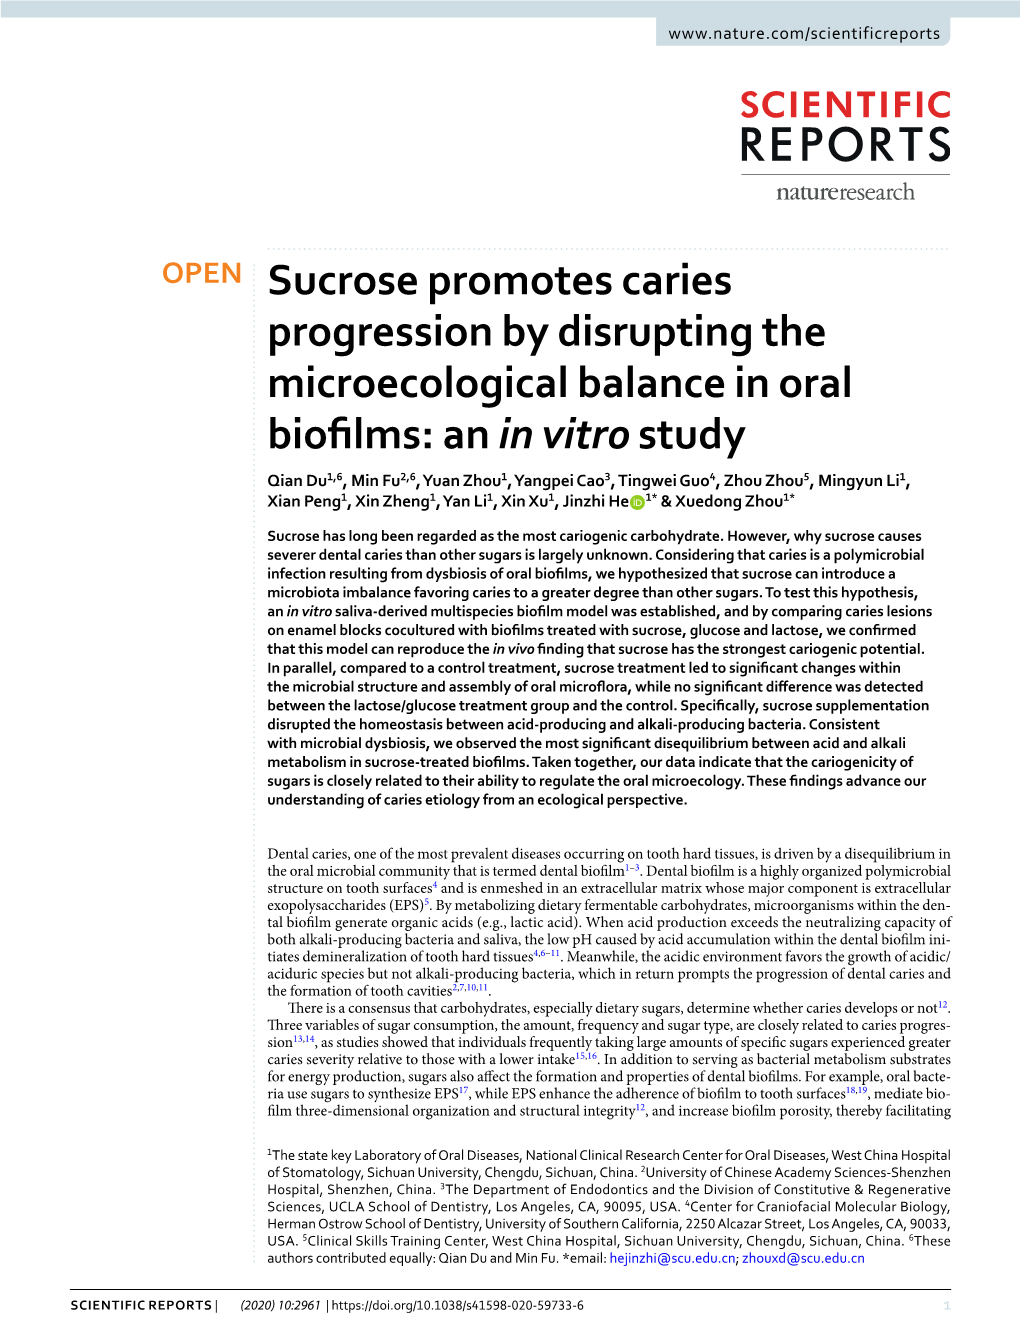 Sucrose Promotes Caries Progression by Disrupting The